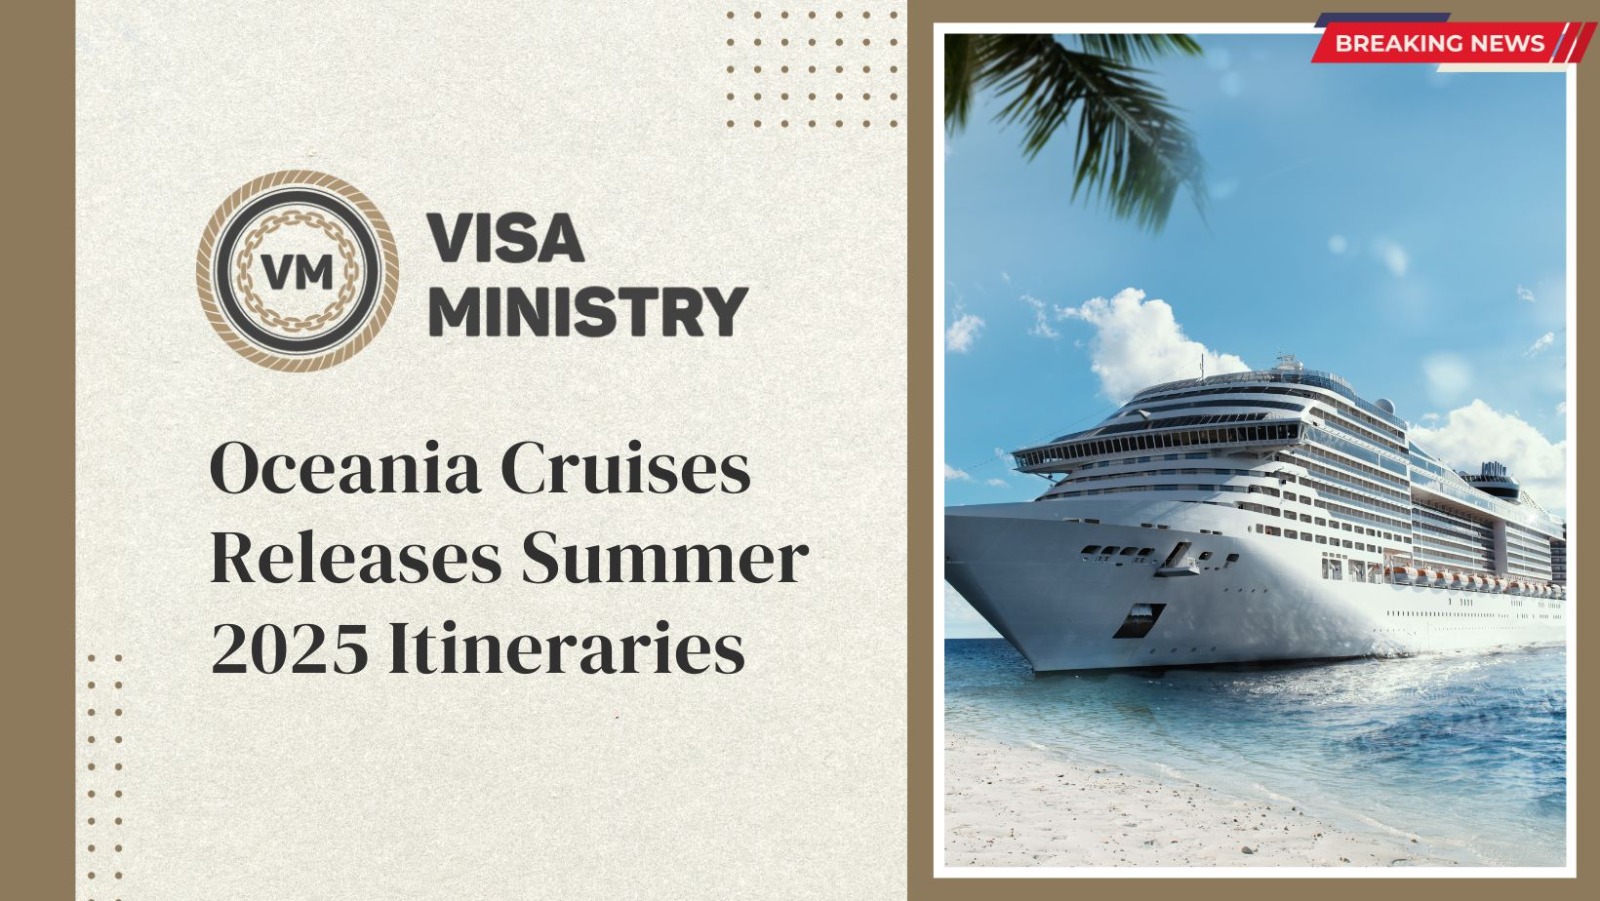 Oceania Cruises Releases Summer 2025 Itineraries VISA MINISTRY